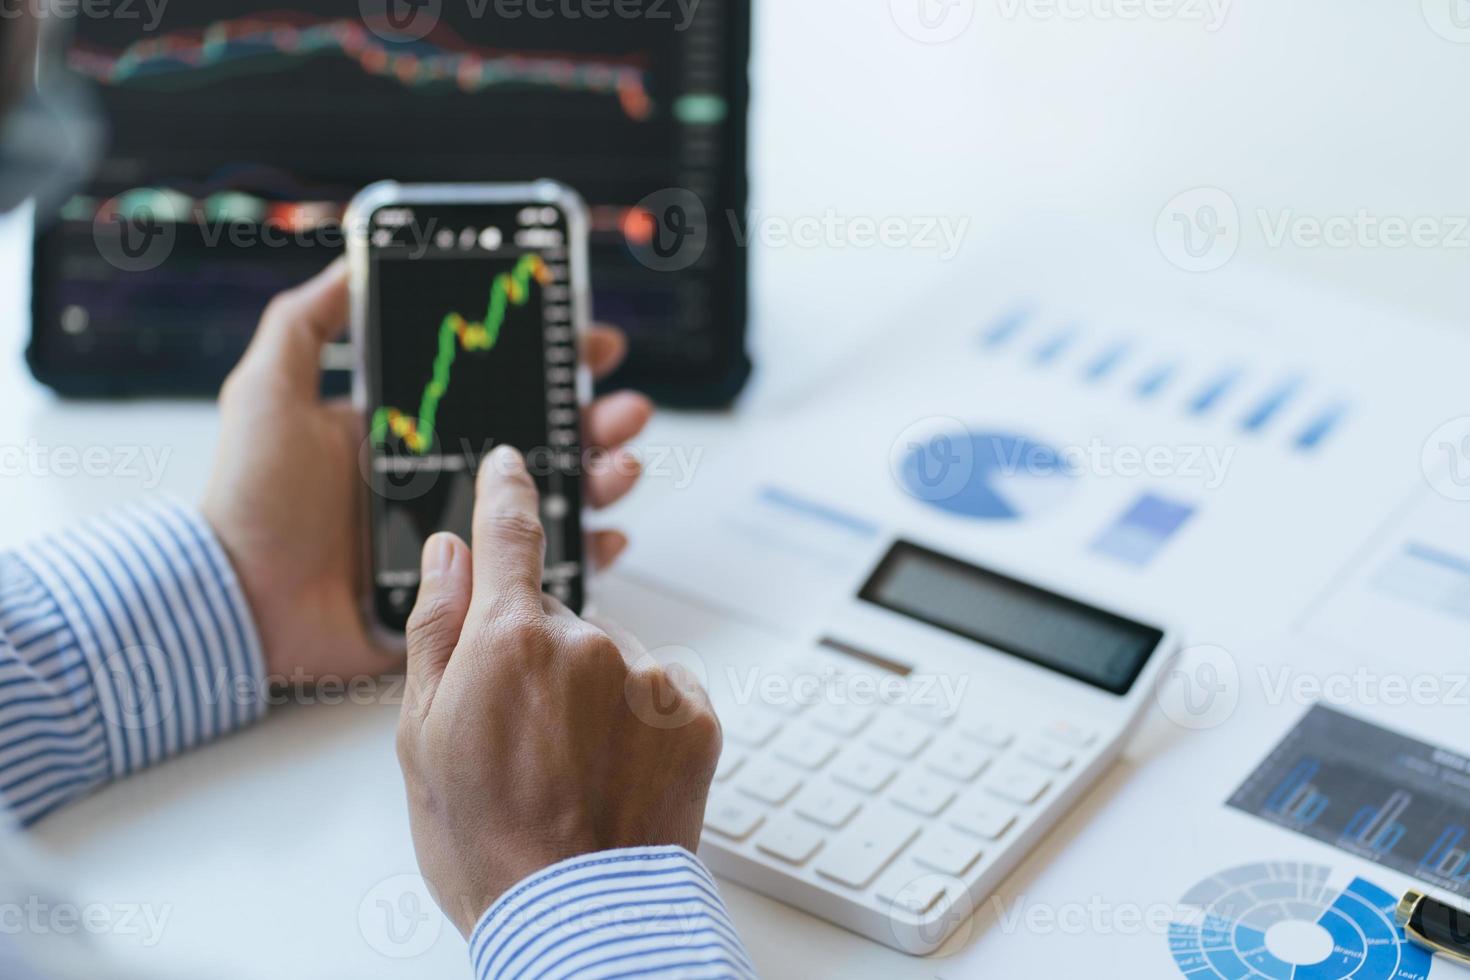 Stock exchange market concept, Business investor trading or stock brokers having a planning and analyzing with display screen and pointing on the data presented and deal on a stock exchange. photo